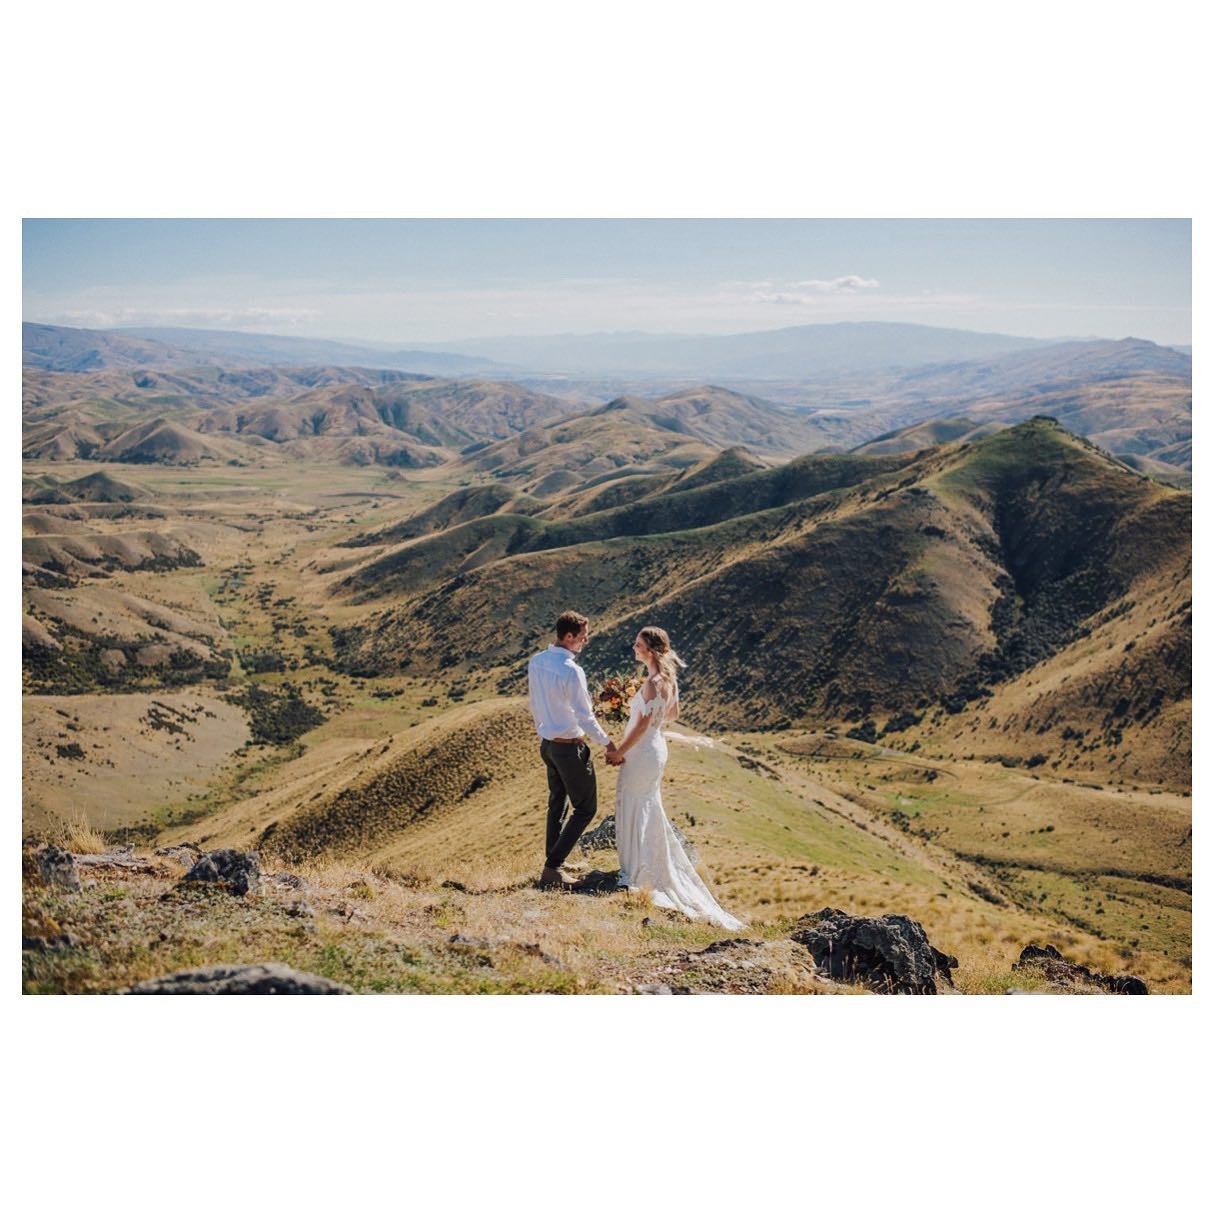 Adding a few past elopements up on my website. Emma &amp; Adams day was epic. Three 4WDs, a celebrant (@hannahlindotagocelebrant) and close family and friends is the perfect recipe!

.
.
#nzwedding #nzphotographer #elopementphotographer #sony #sonyal